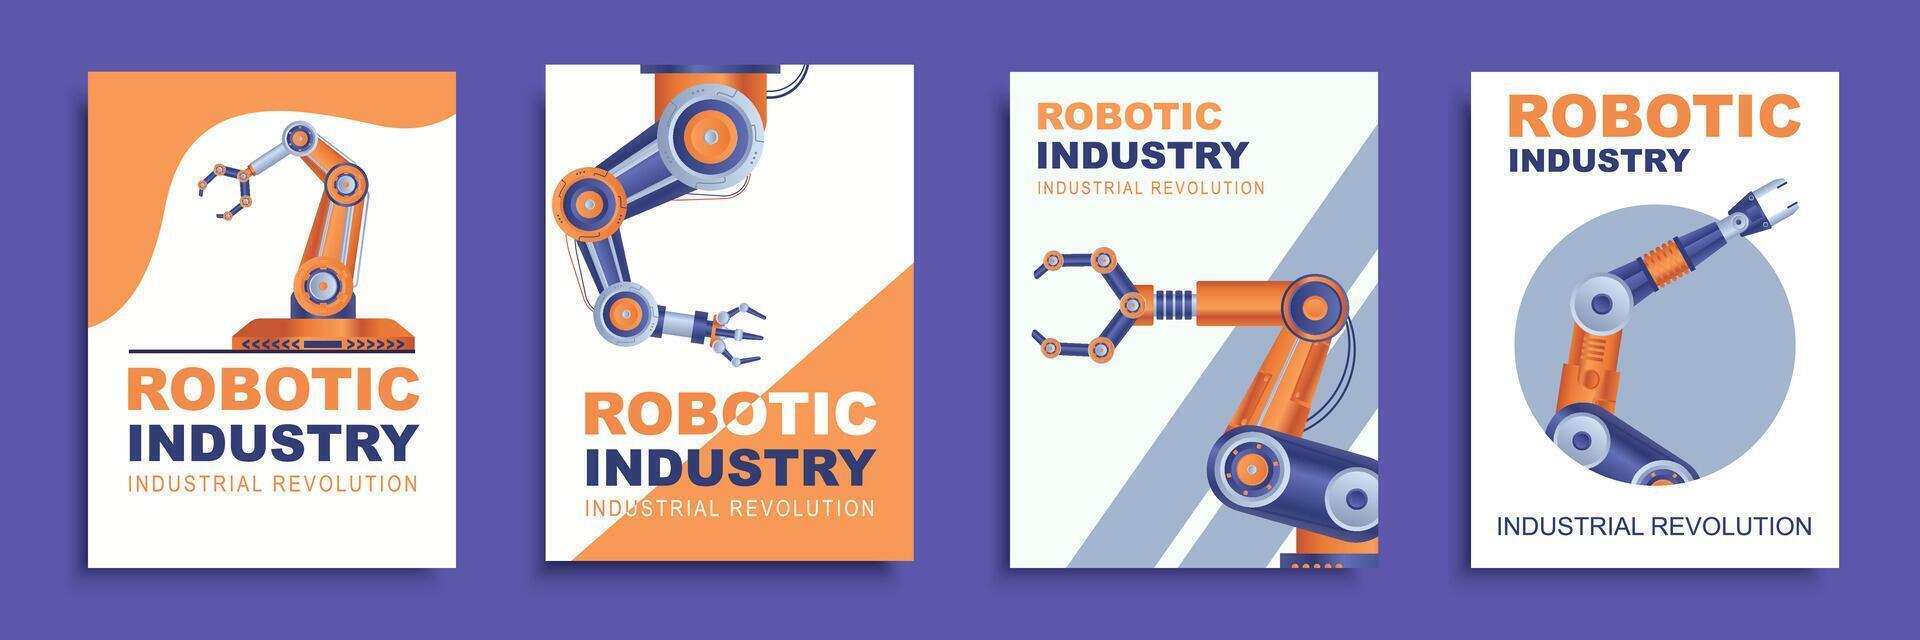 Robotic industry cover brochure set in flat design. Poster templates with automatic manufacture robotic arms for industrial process and manufacturing processes at modern factory. Vector illustration